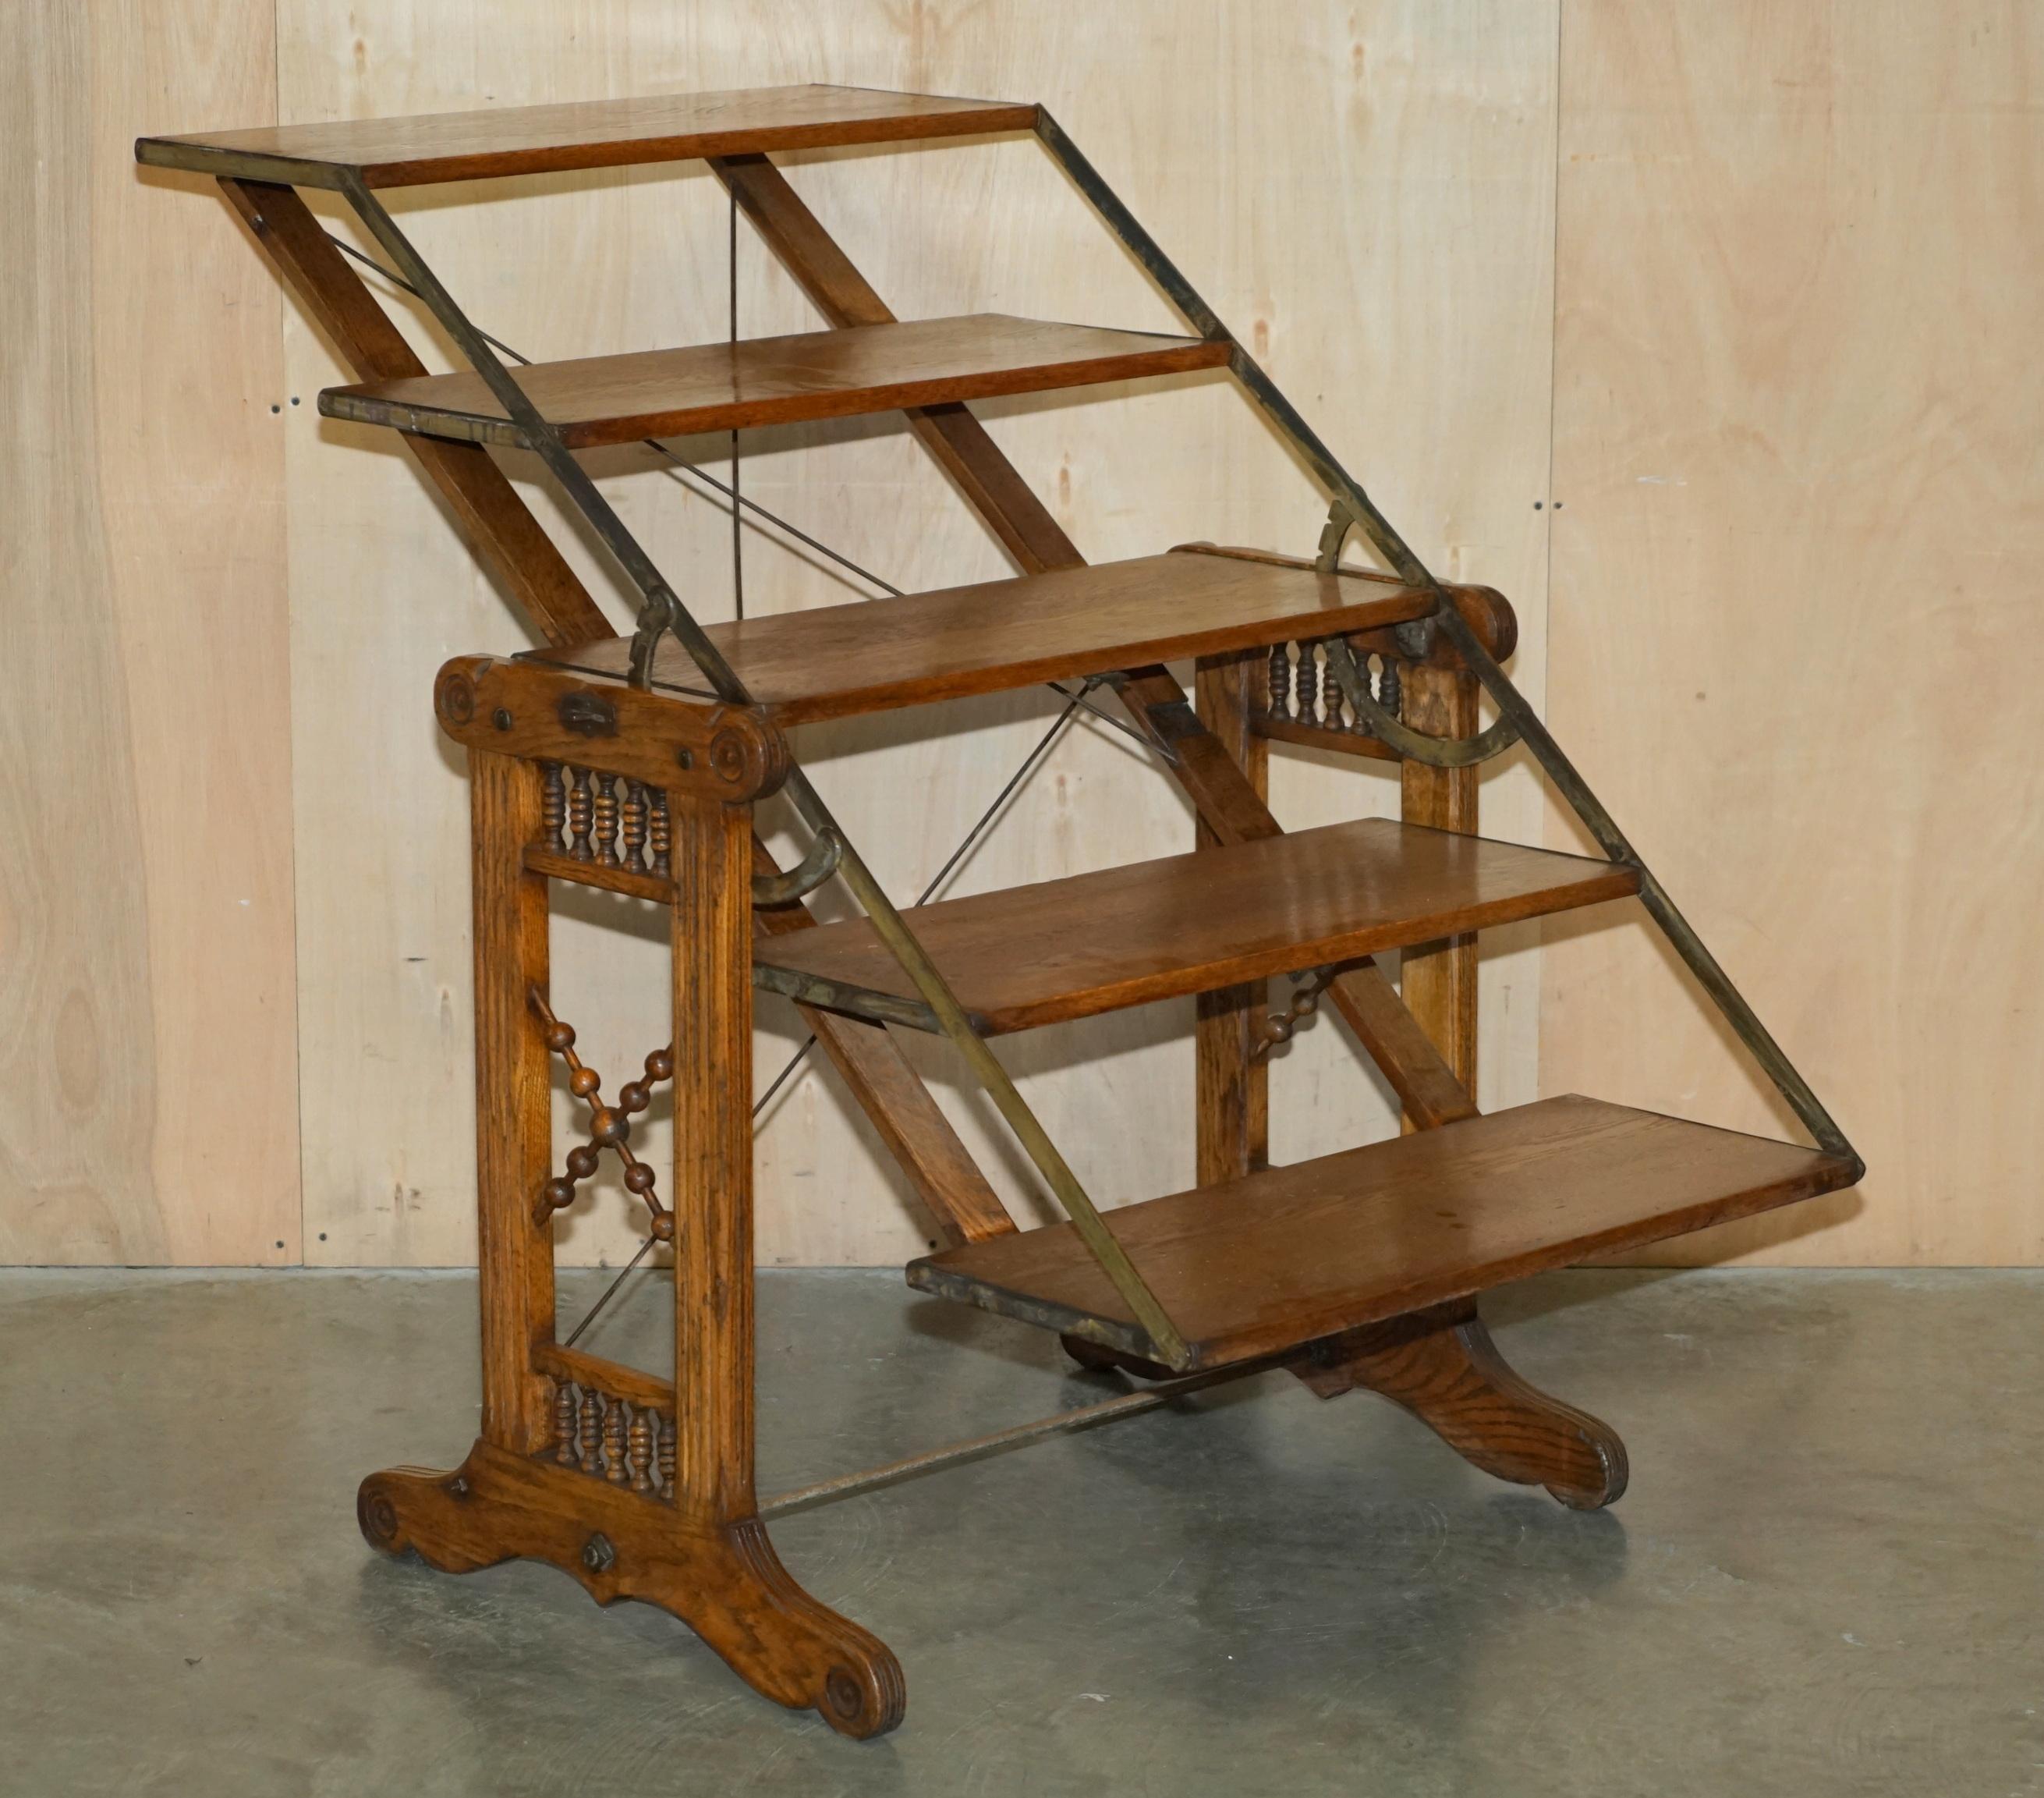 FULLY RESTORED CiRCA 1910 BOECKH BROTHERS METAMORPHIC BAKERS TABLE BOOKCASE For Sale 8